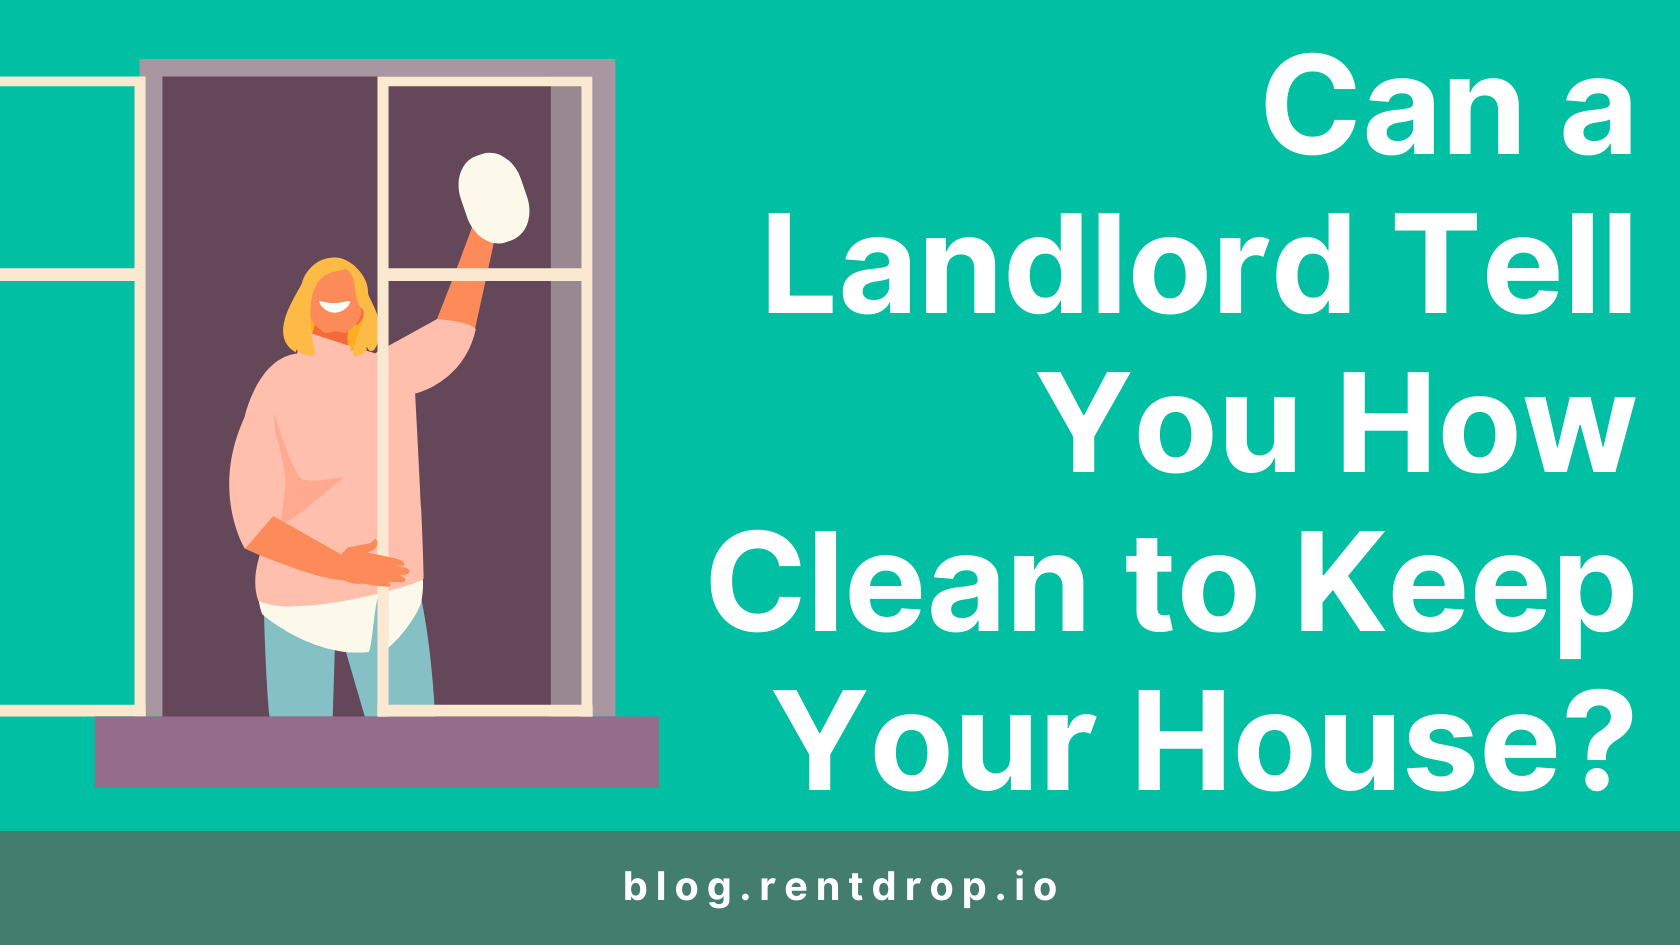 rentdrop can a landlord tell you how clean to keep your house